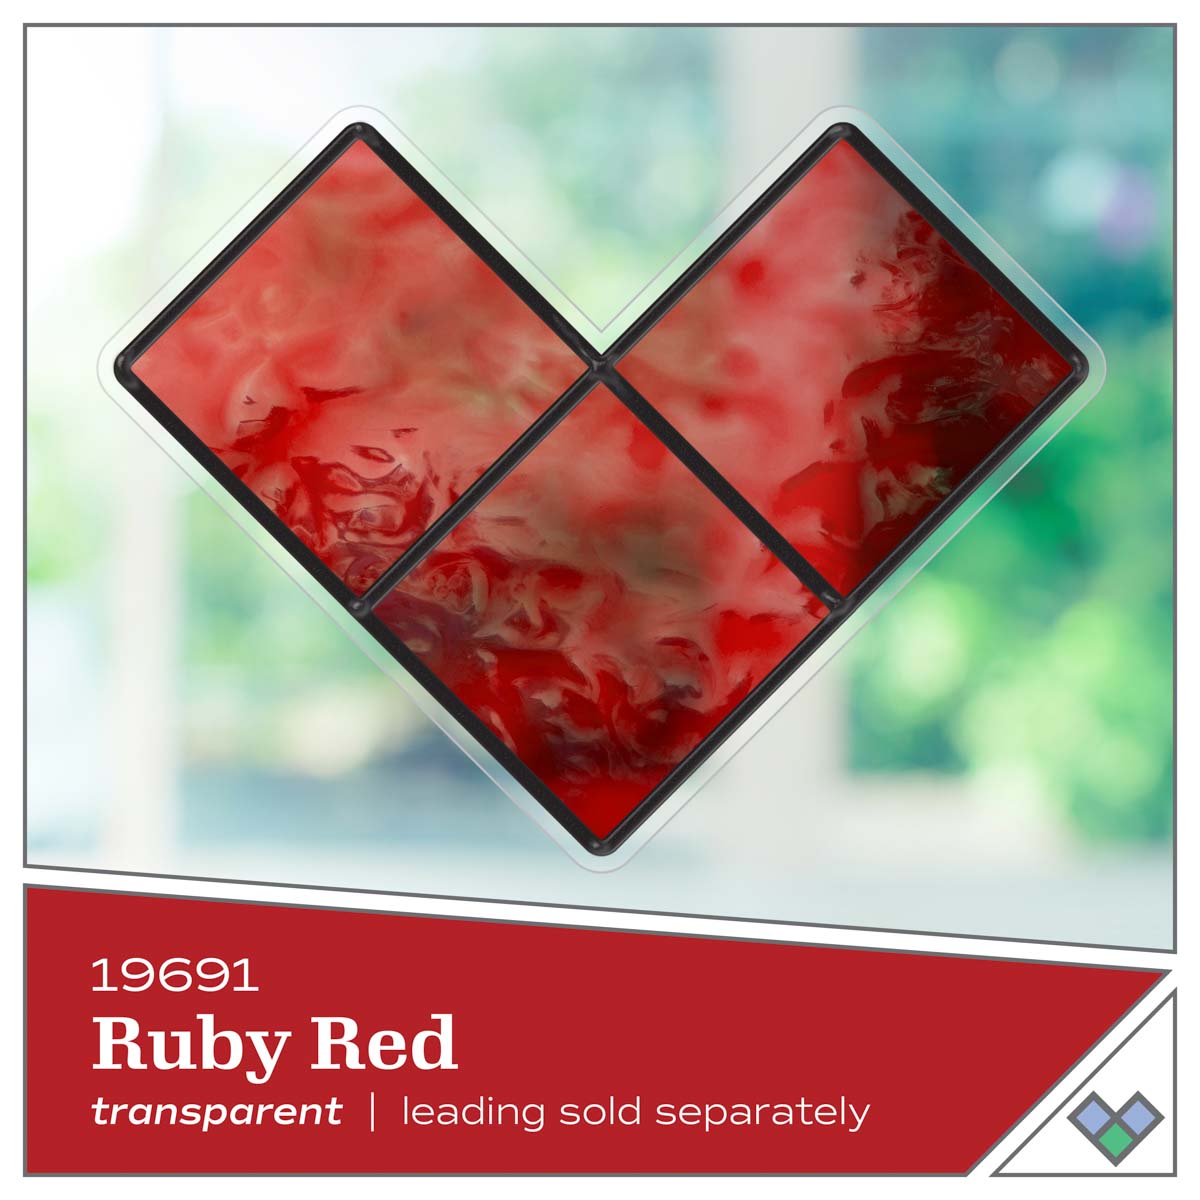 Gallery Glass ® Stained Glass Effect Paint - Ruby Red, 2 oz. - 19691